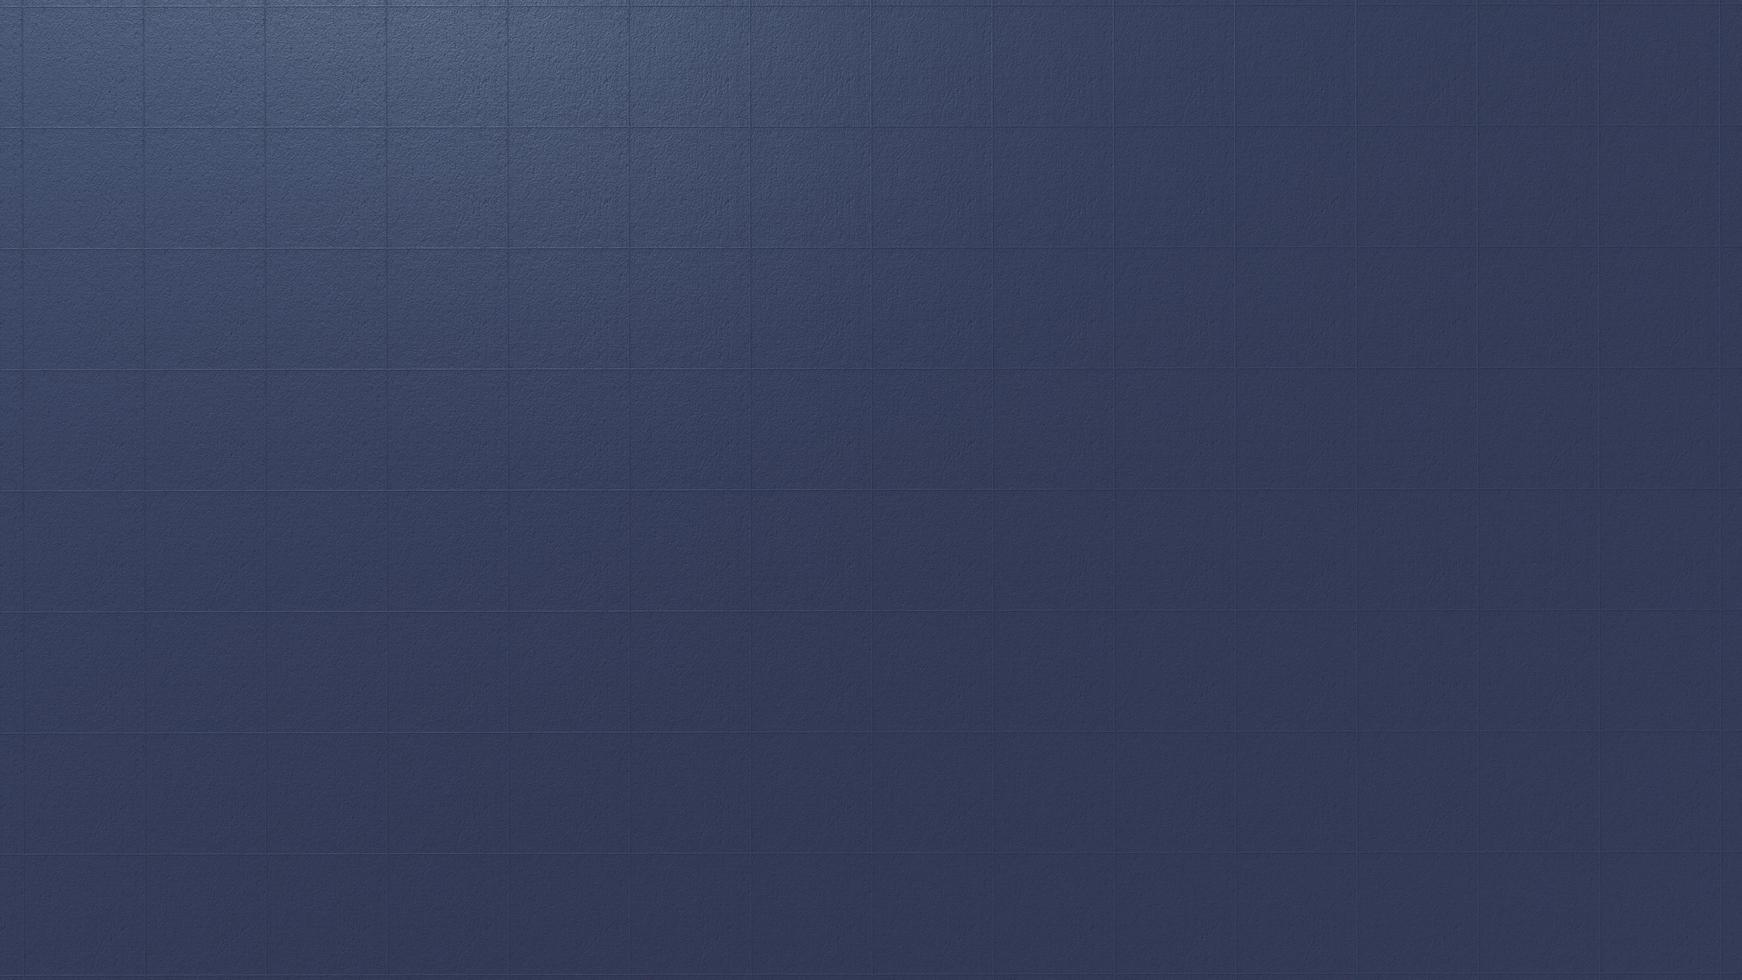 tile texture blue for background or cover photo